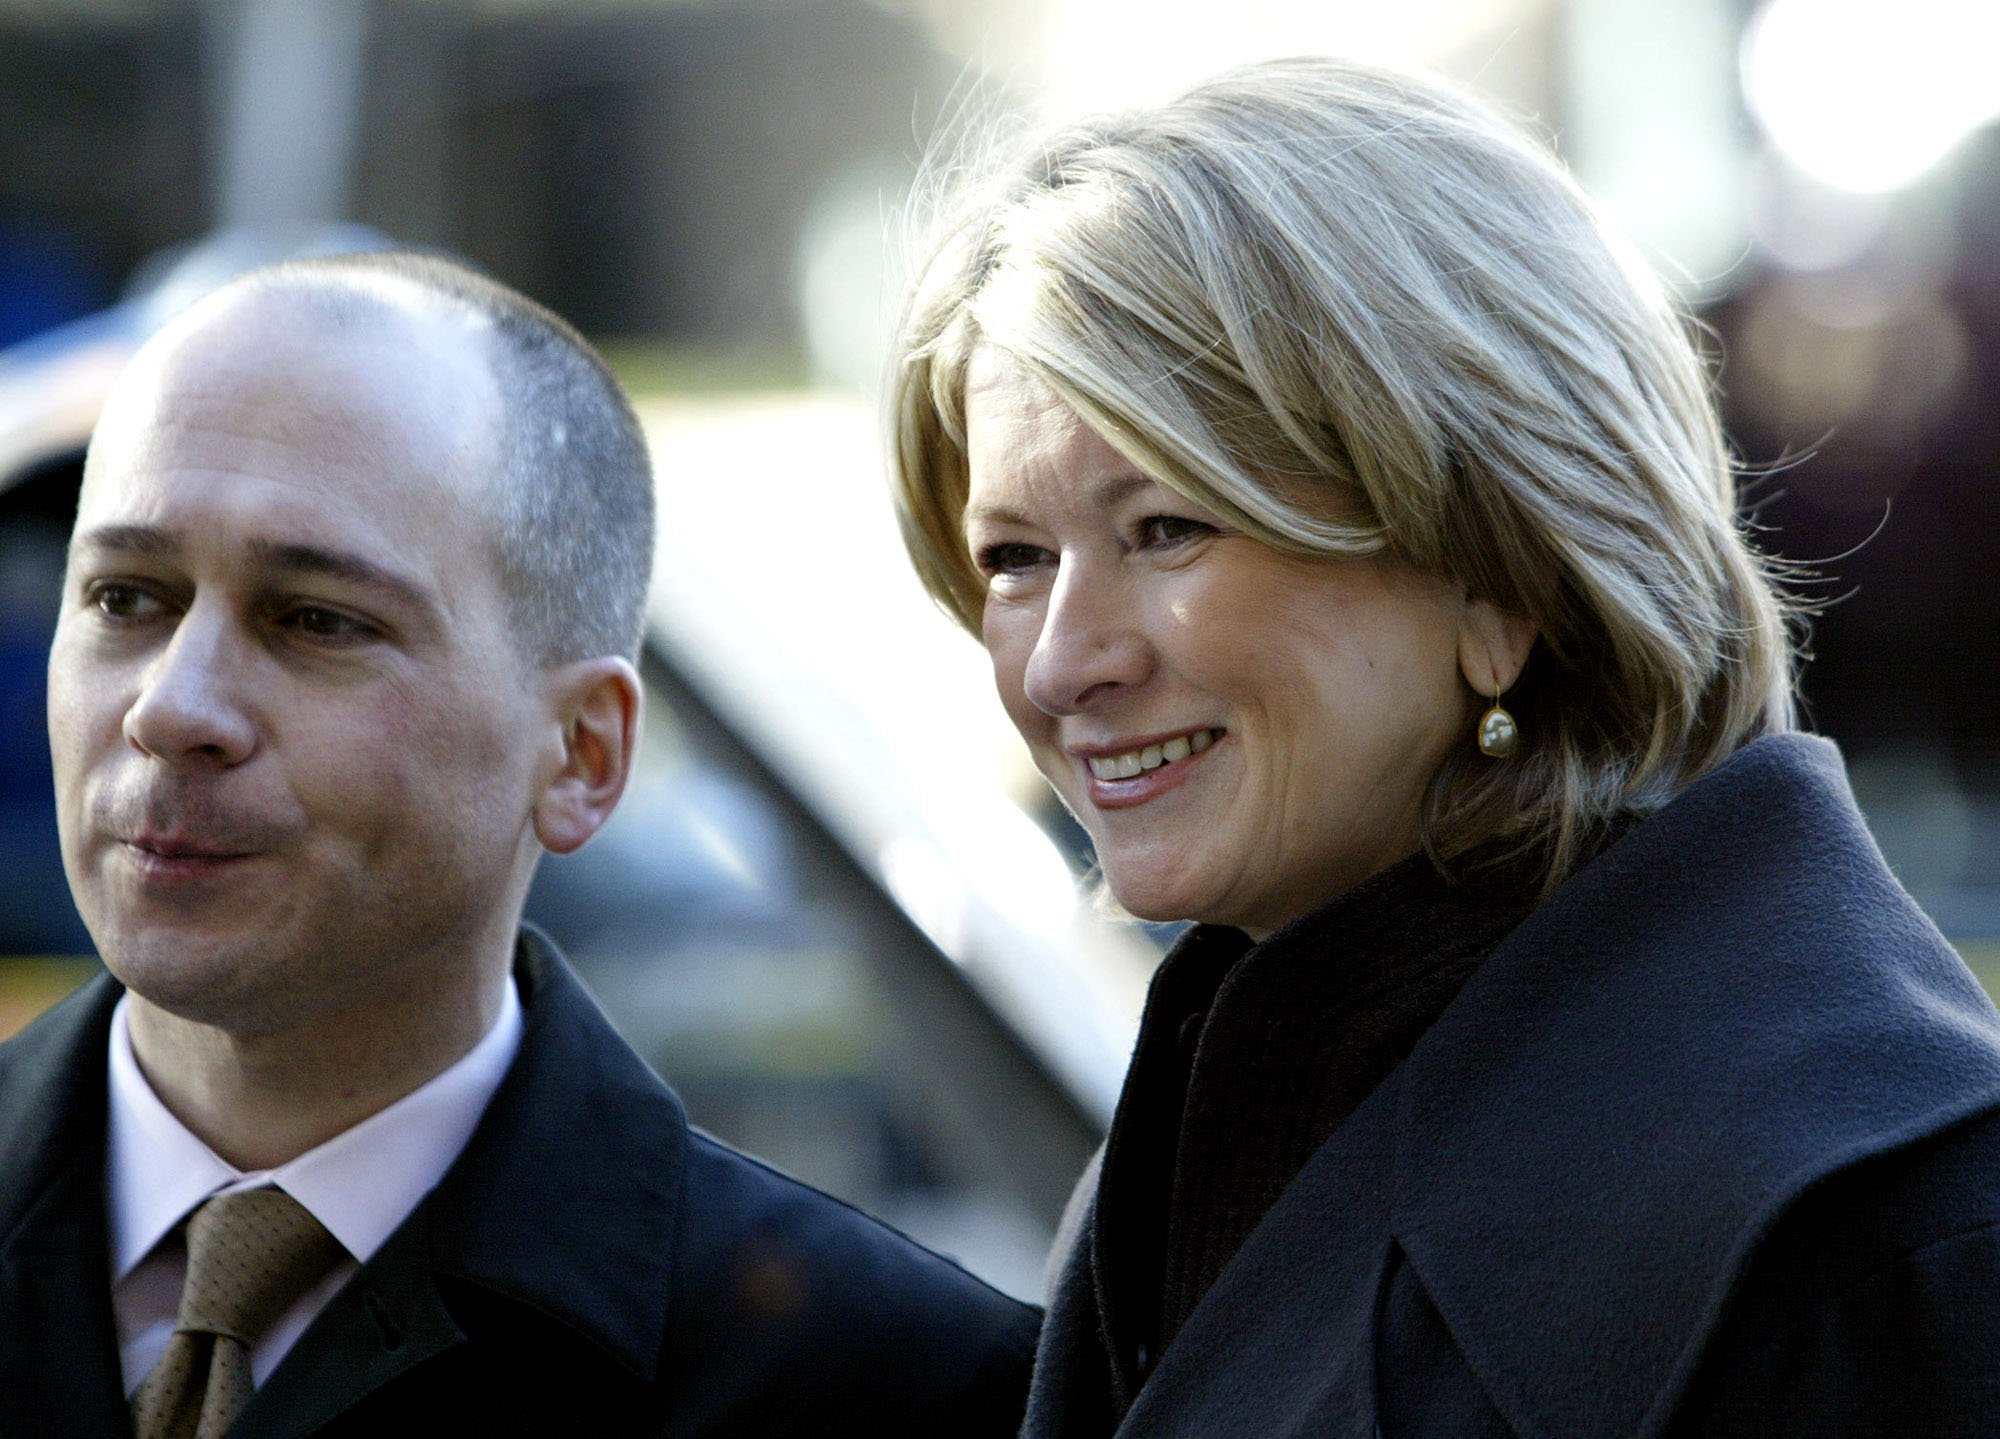 Martha Stewart and her son-in-law and attorney John Cuti arrive at federal court in New York on February 25, 2004 | Source: Getty Images